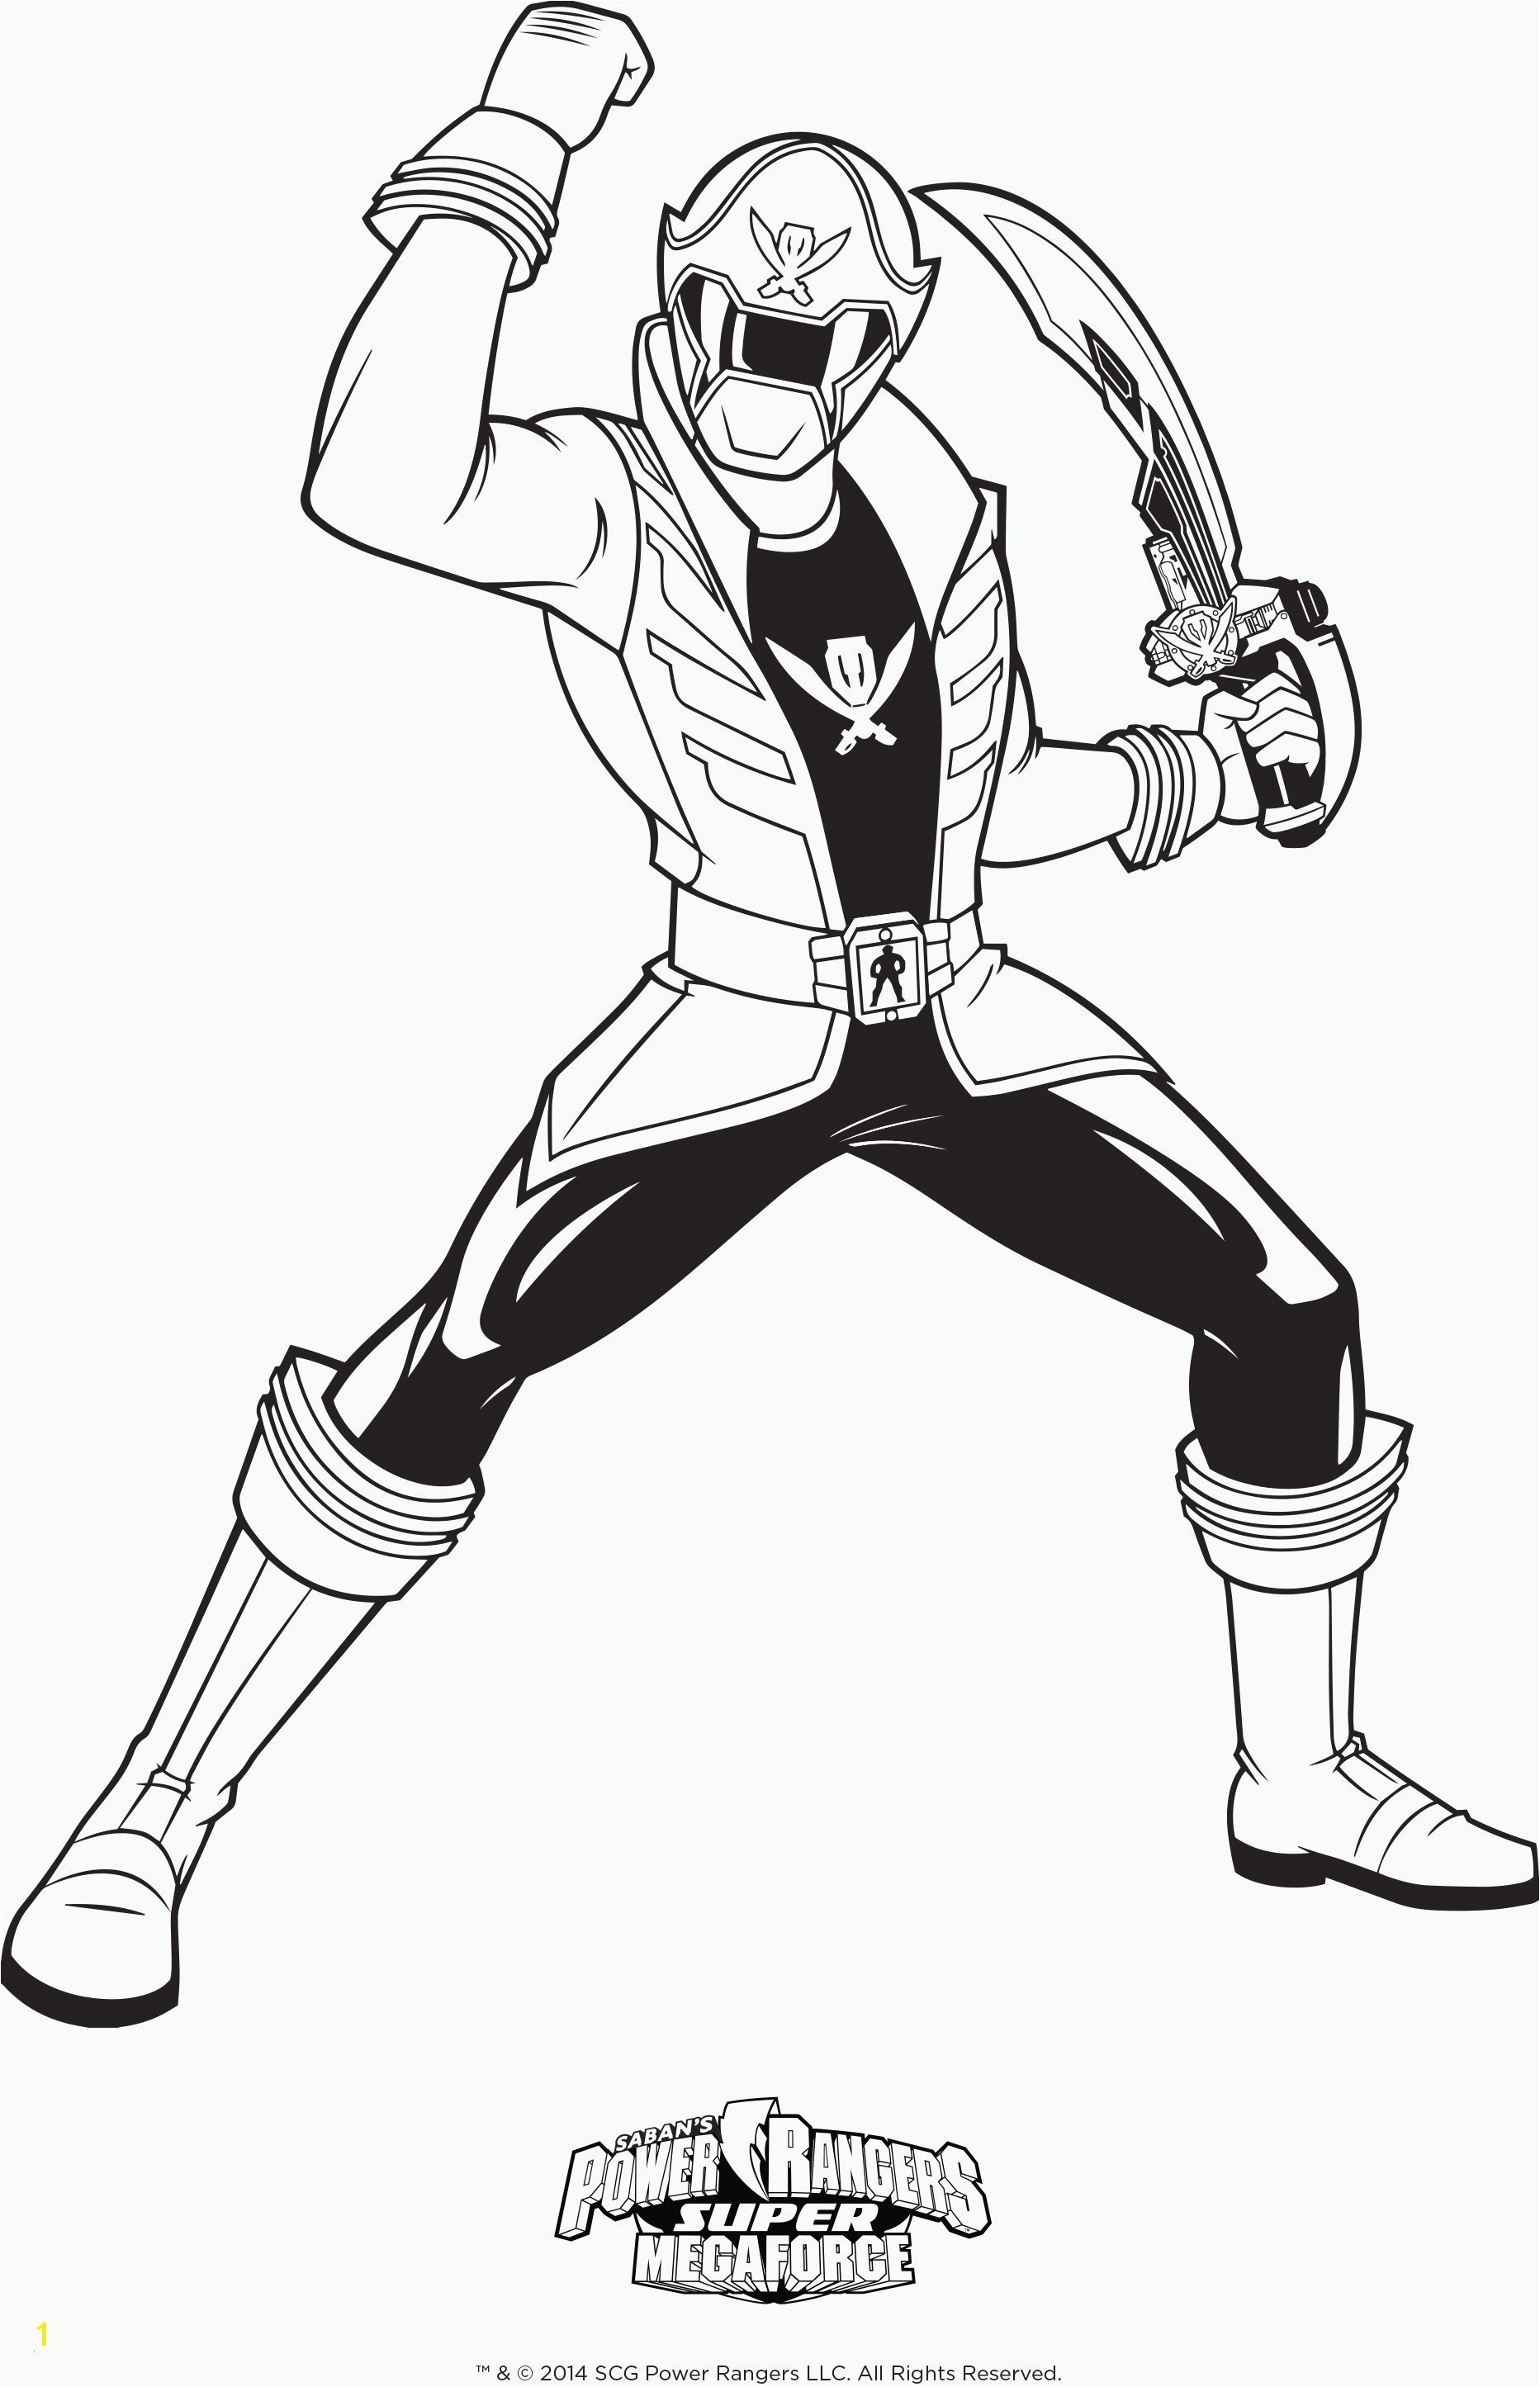 Green Power Ranger Coloring Page Unique Power Rangers Coloring Pages Verikira